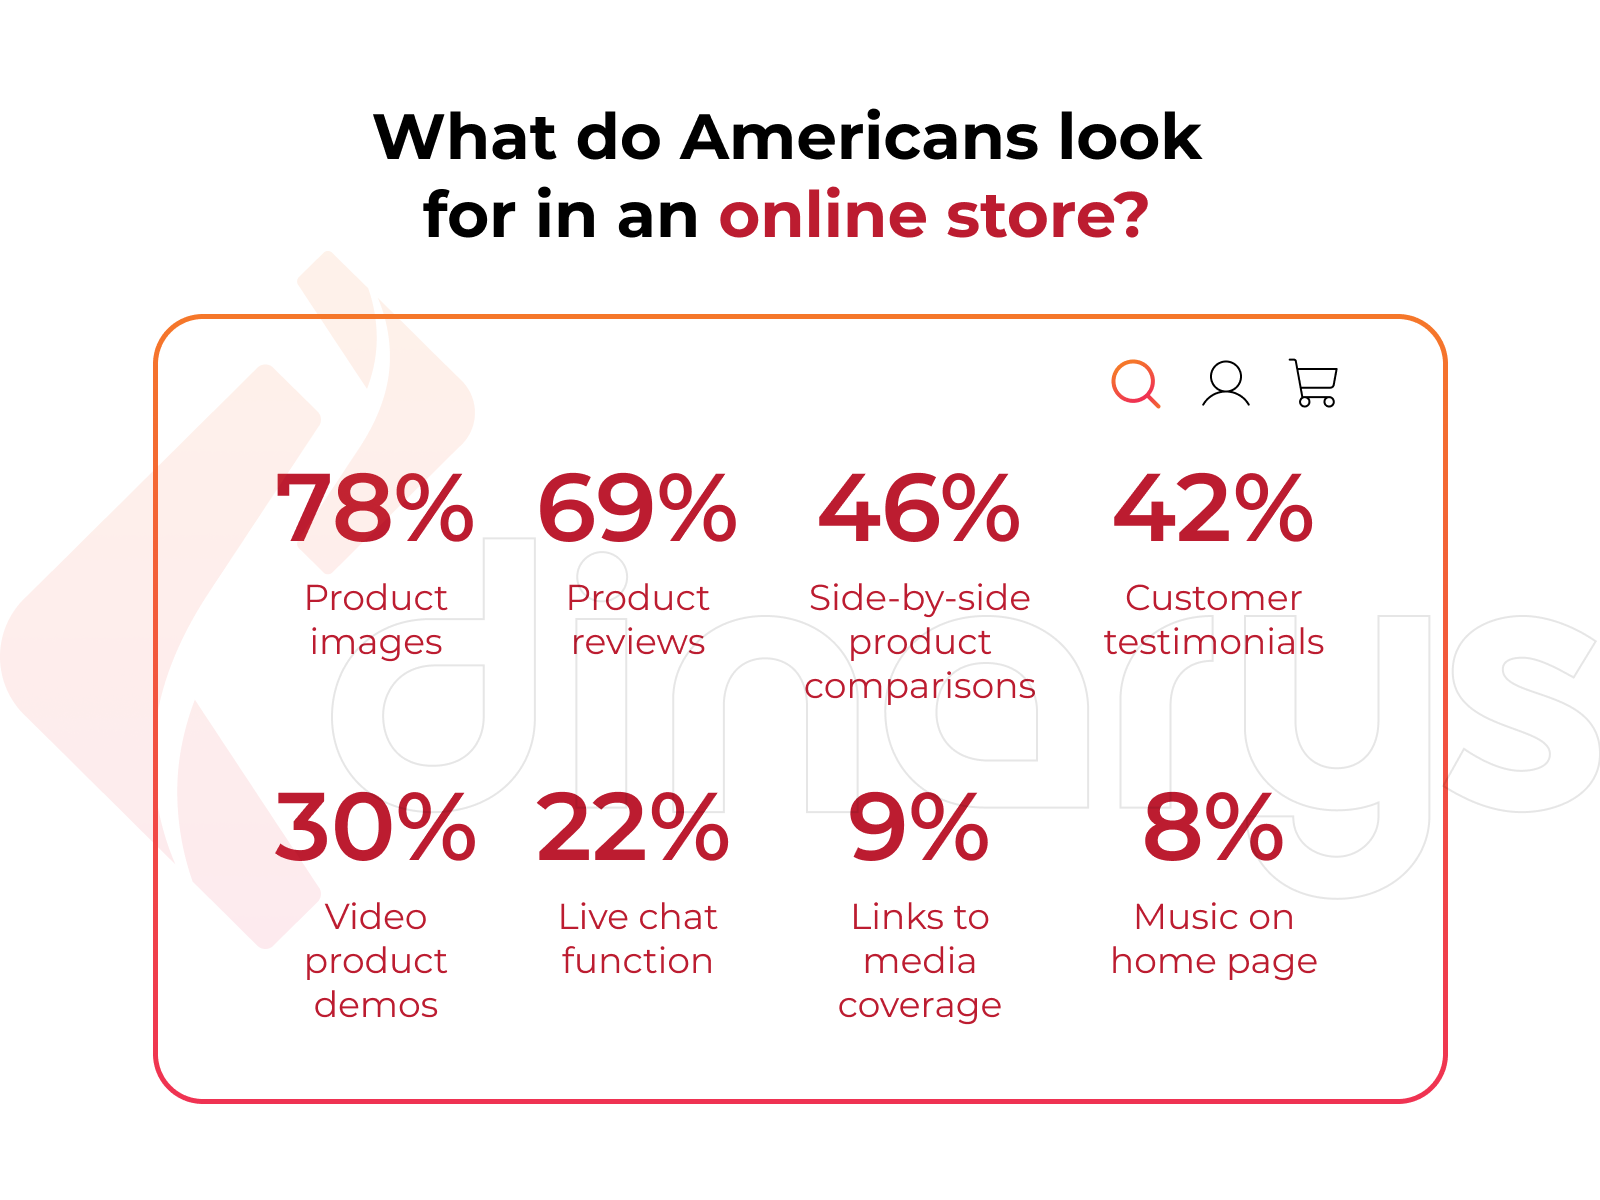 Besides the product information, online customers, unsurprisingly, want to see feedback and compare similar products.